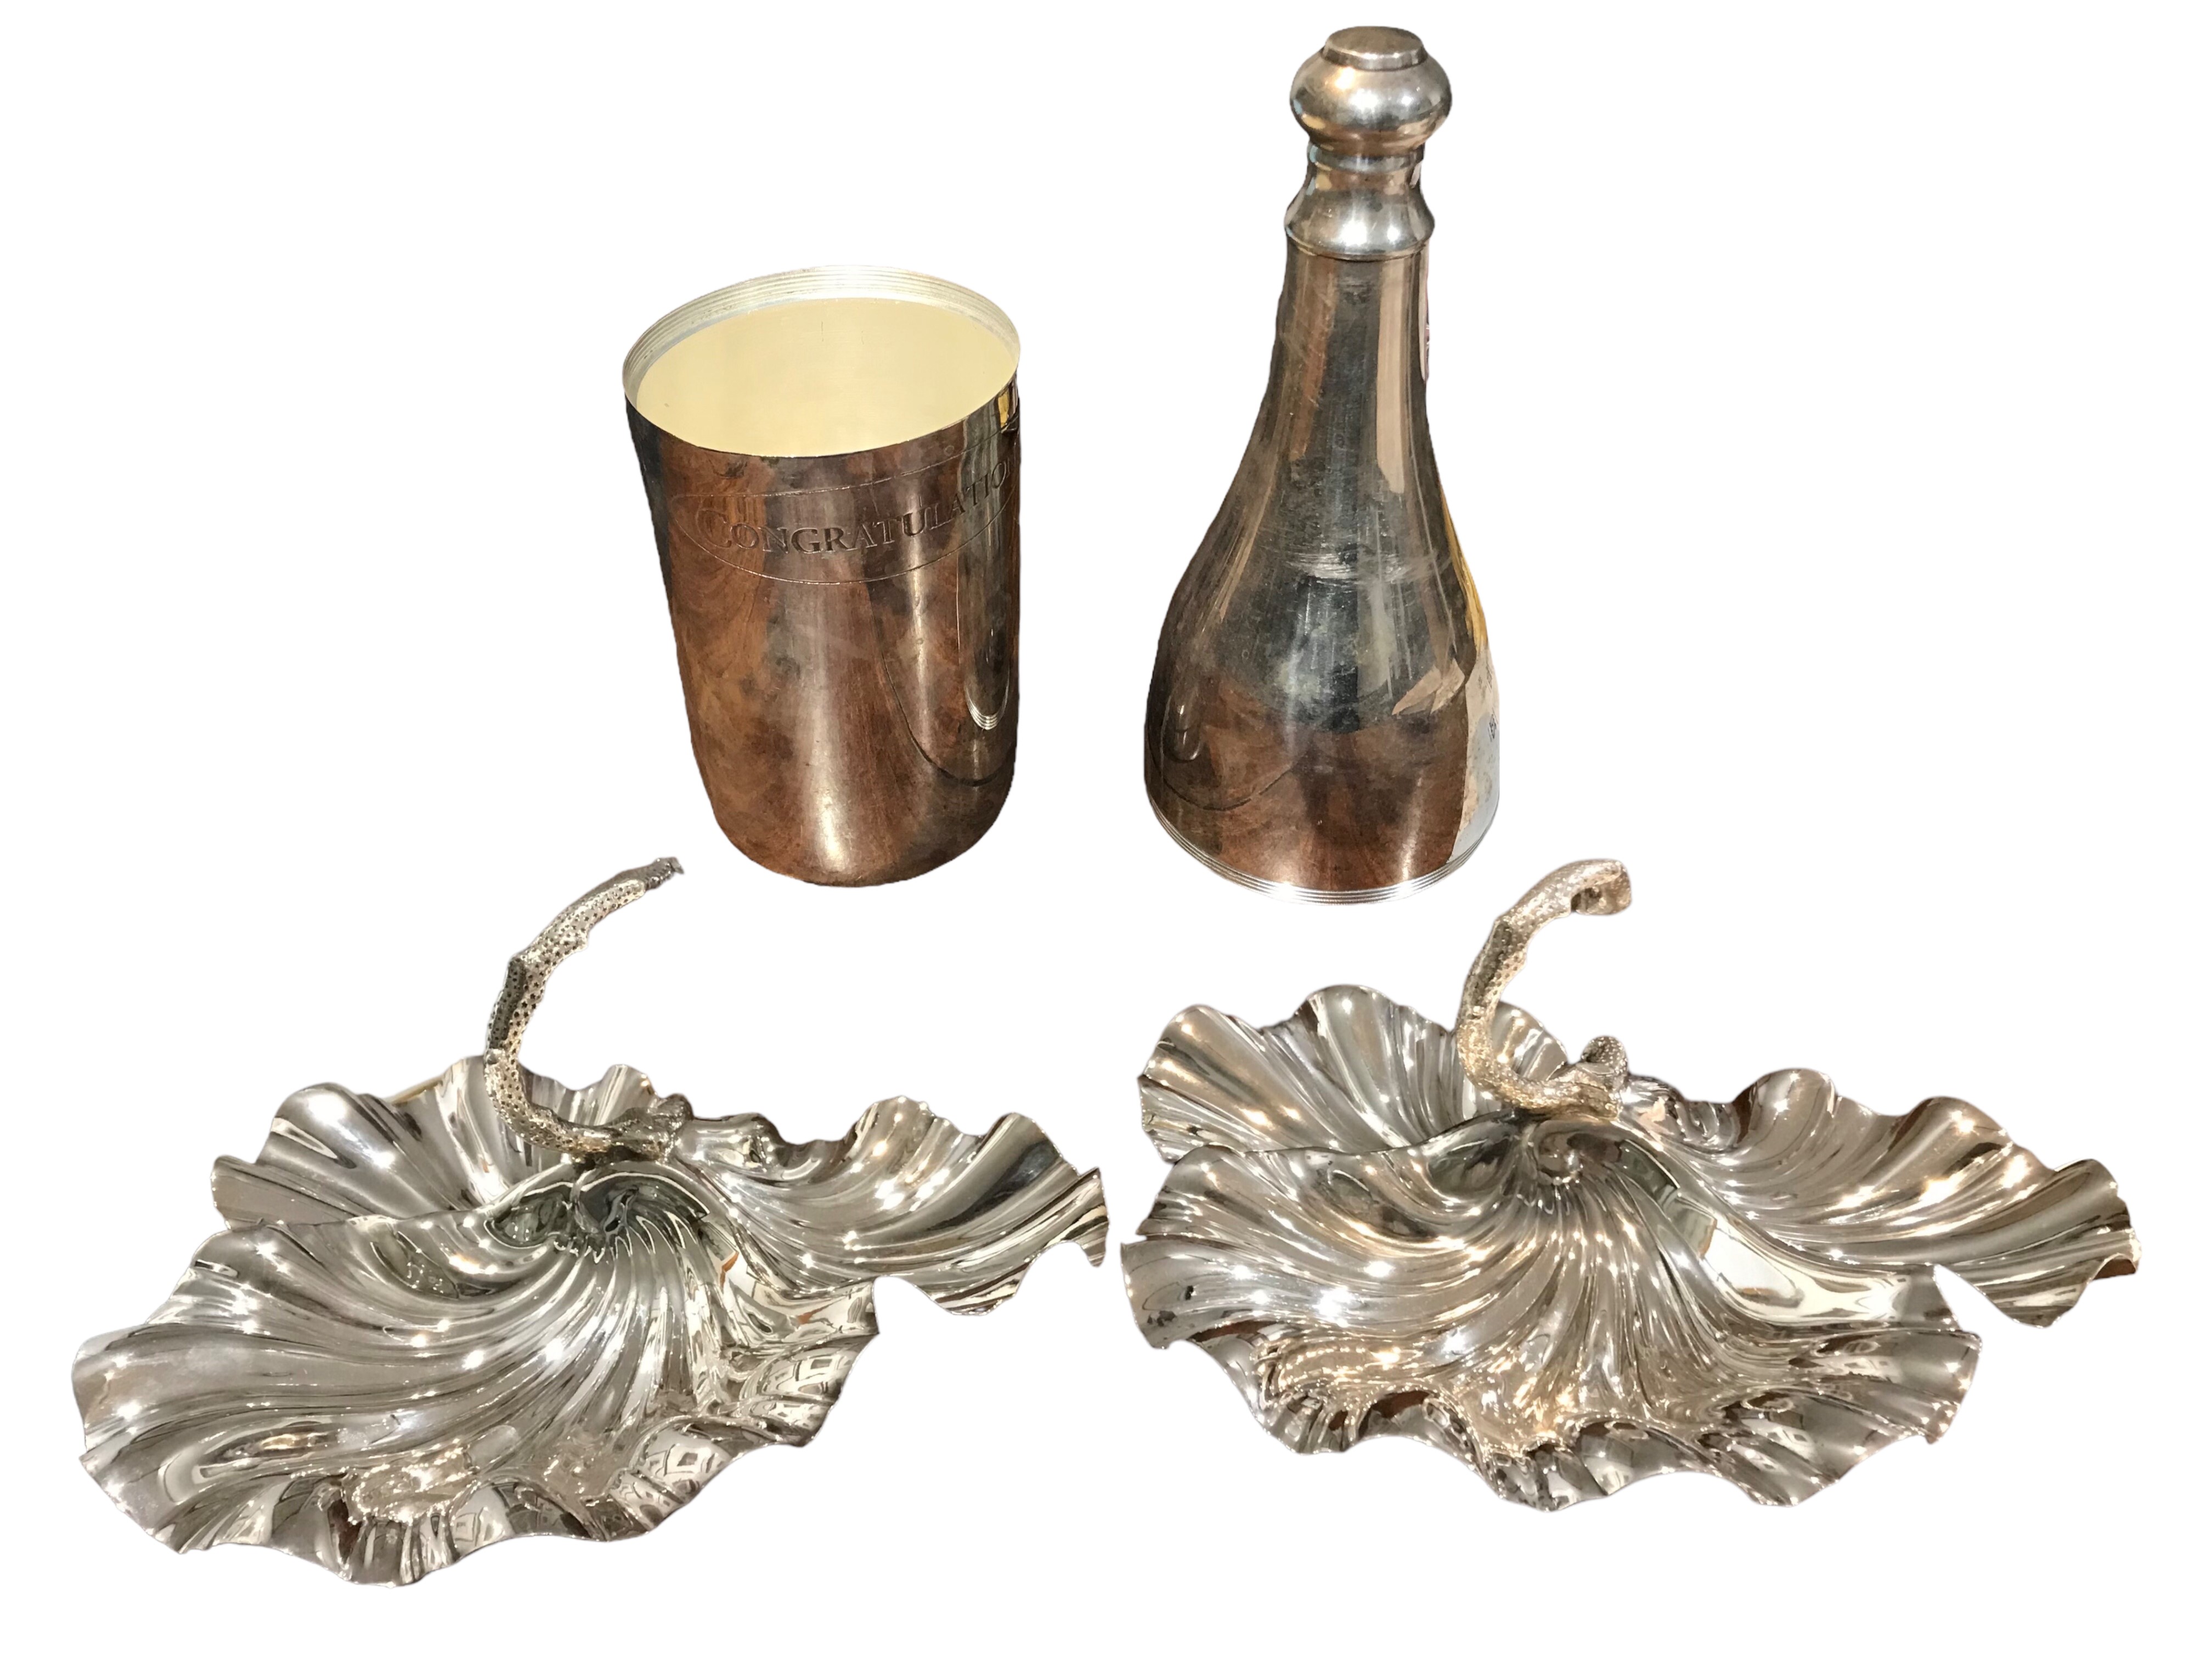 WILLIAM HUTTON & SONS, A PAIR OF SILVER PLATED SHELL AND CORAL DESIGN HORS D’OEUVRES DISHES Together